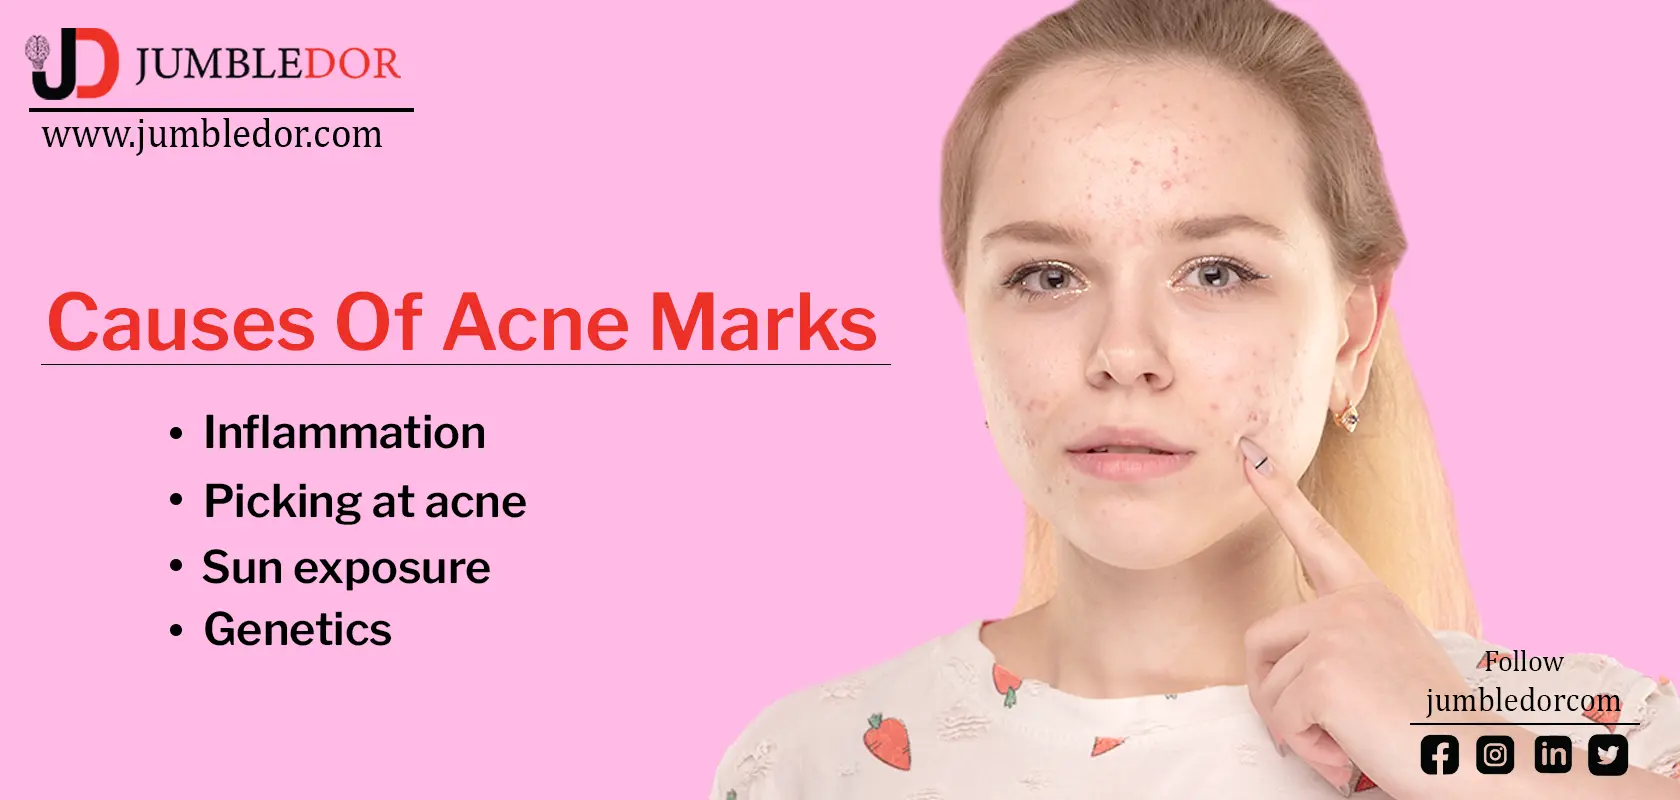 5 home remedies to deal with acne marks | Jumbledor